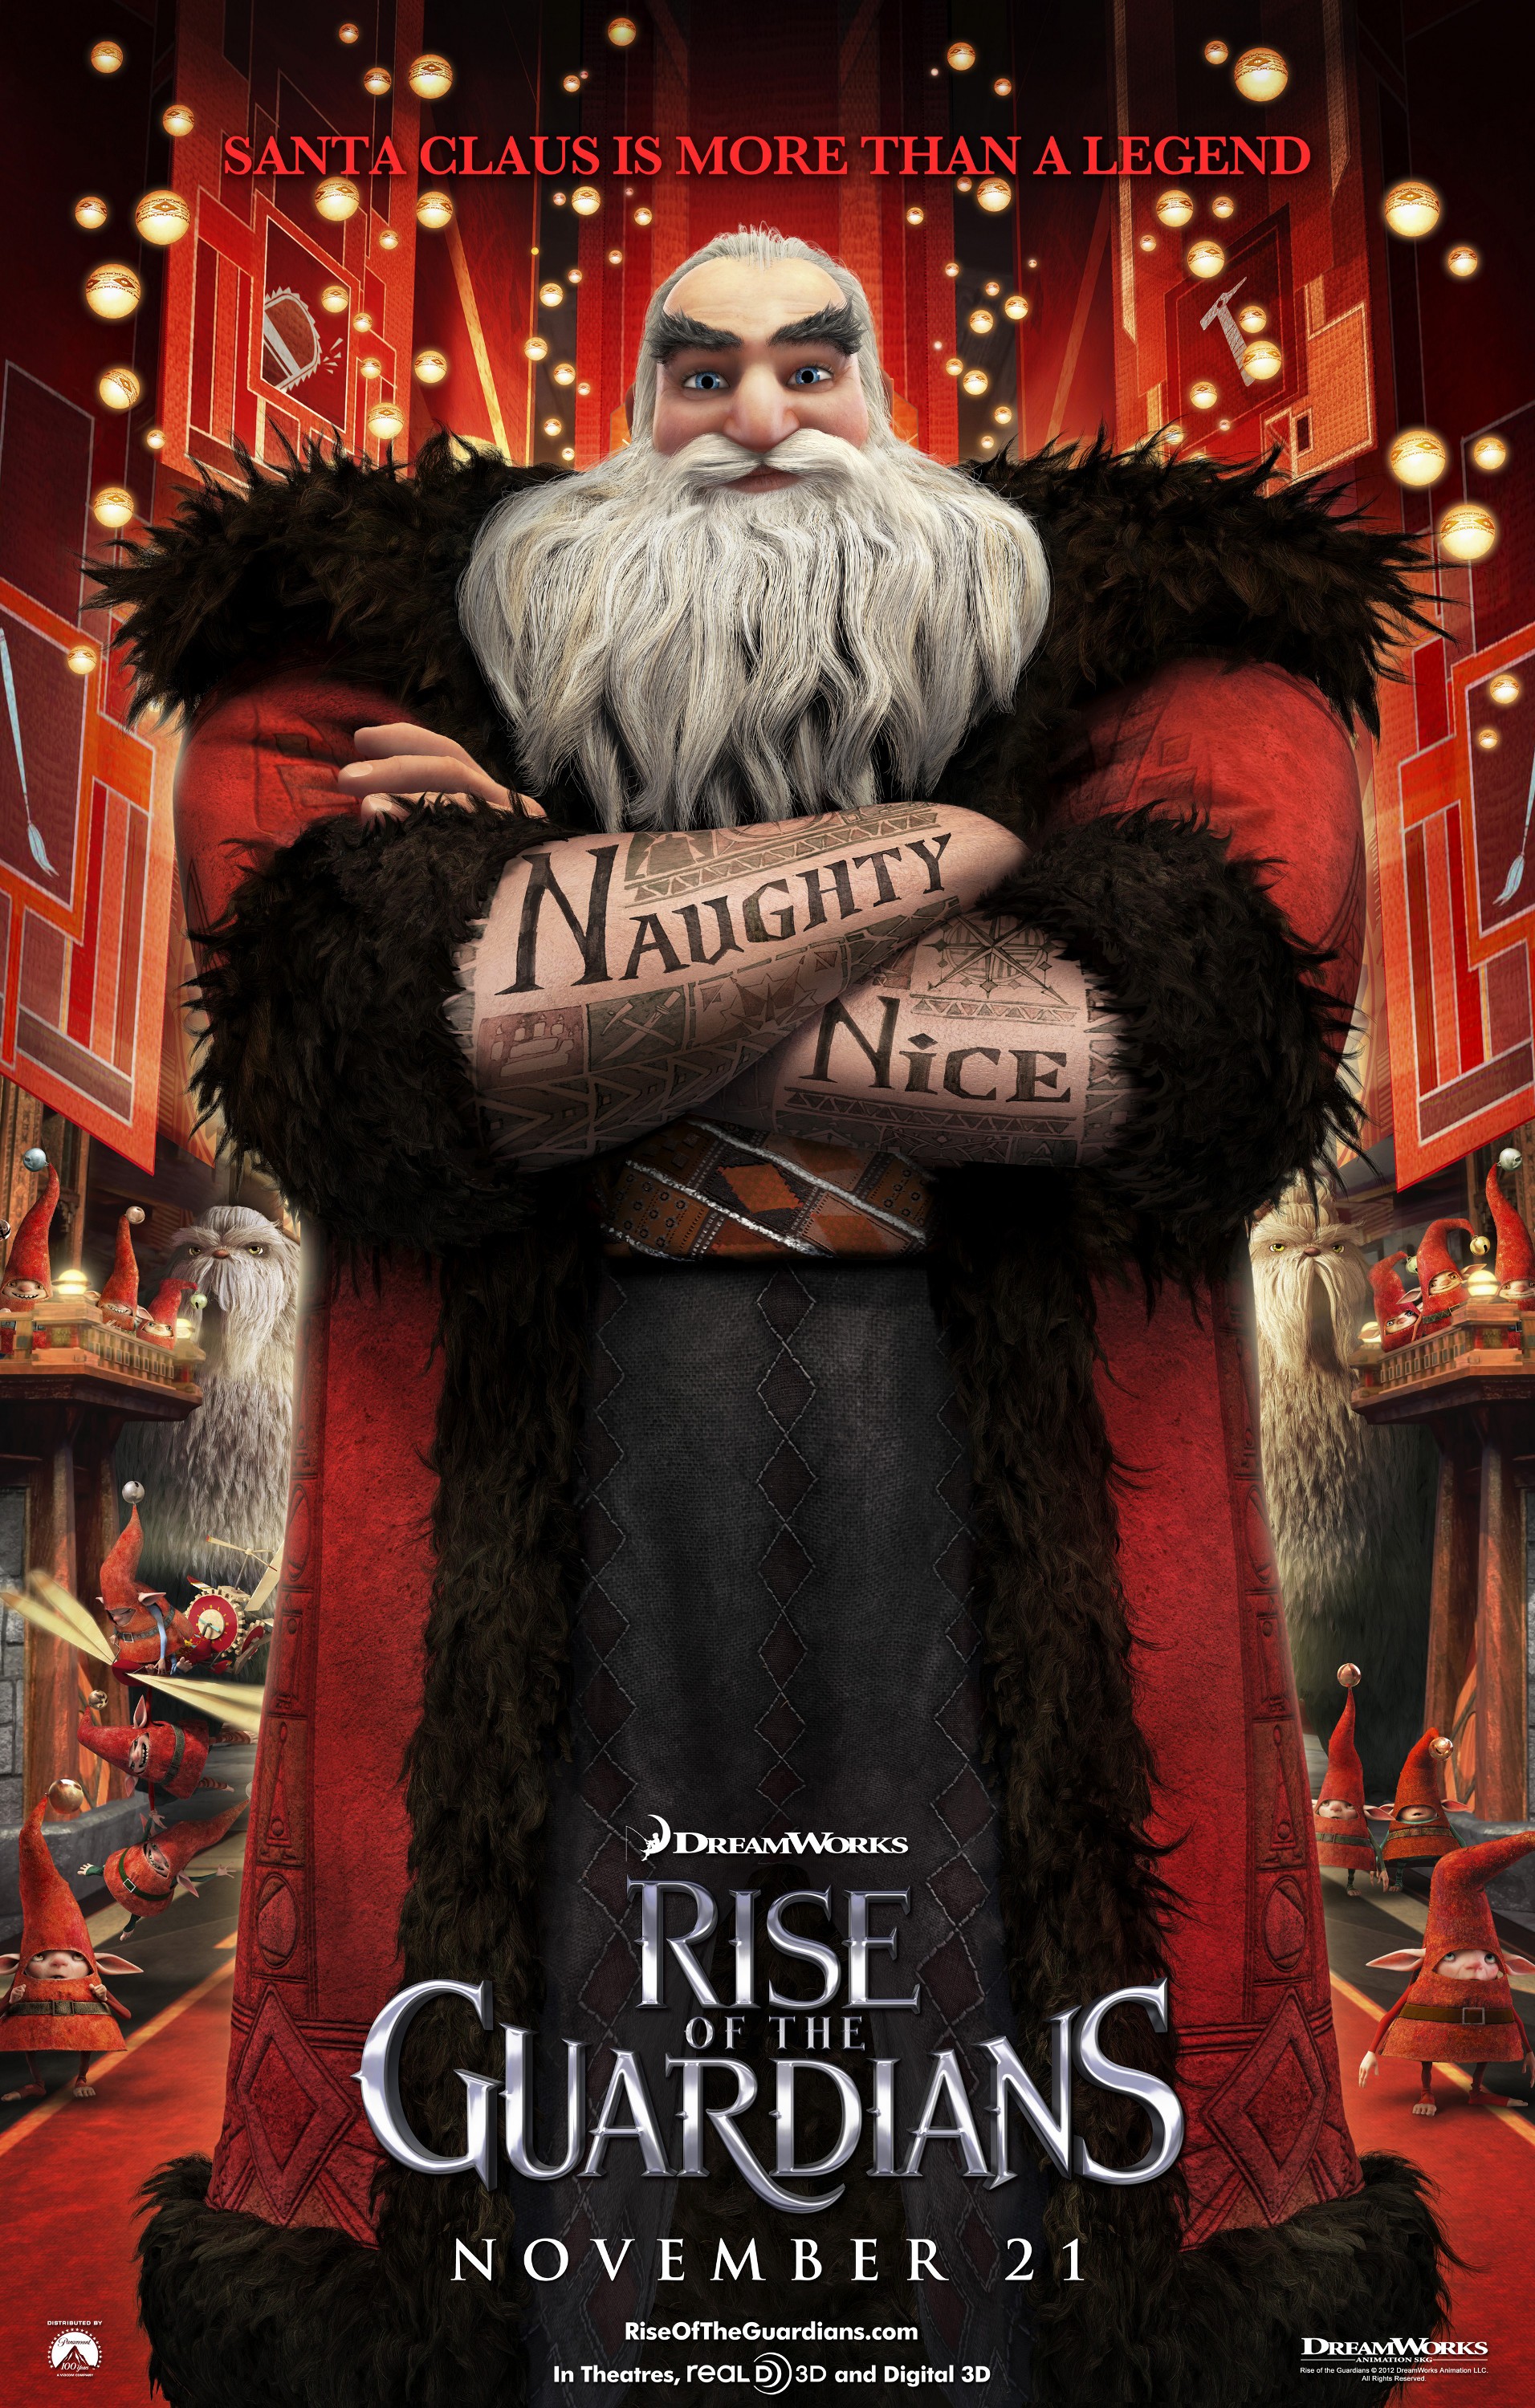 New Rise of the Guardians Trailer from DreamWorks